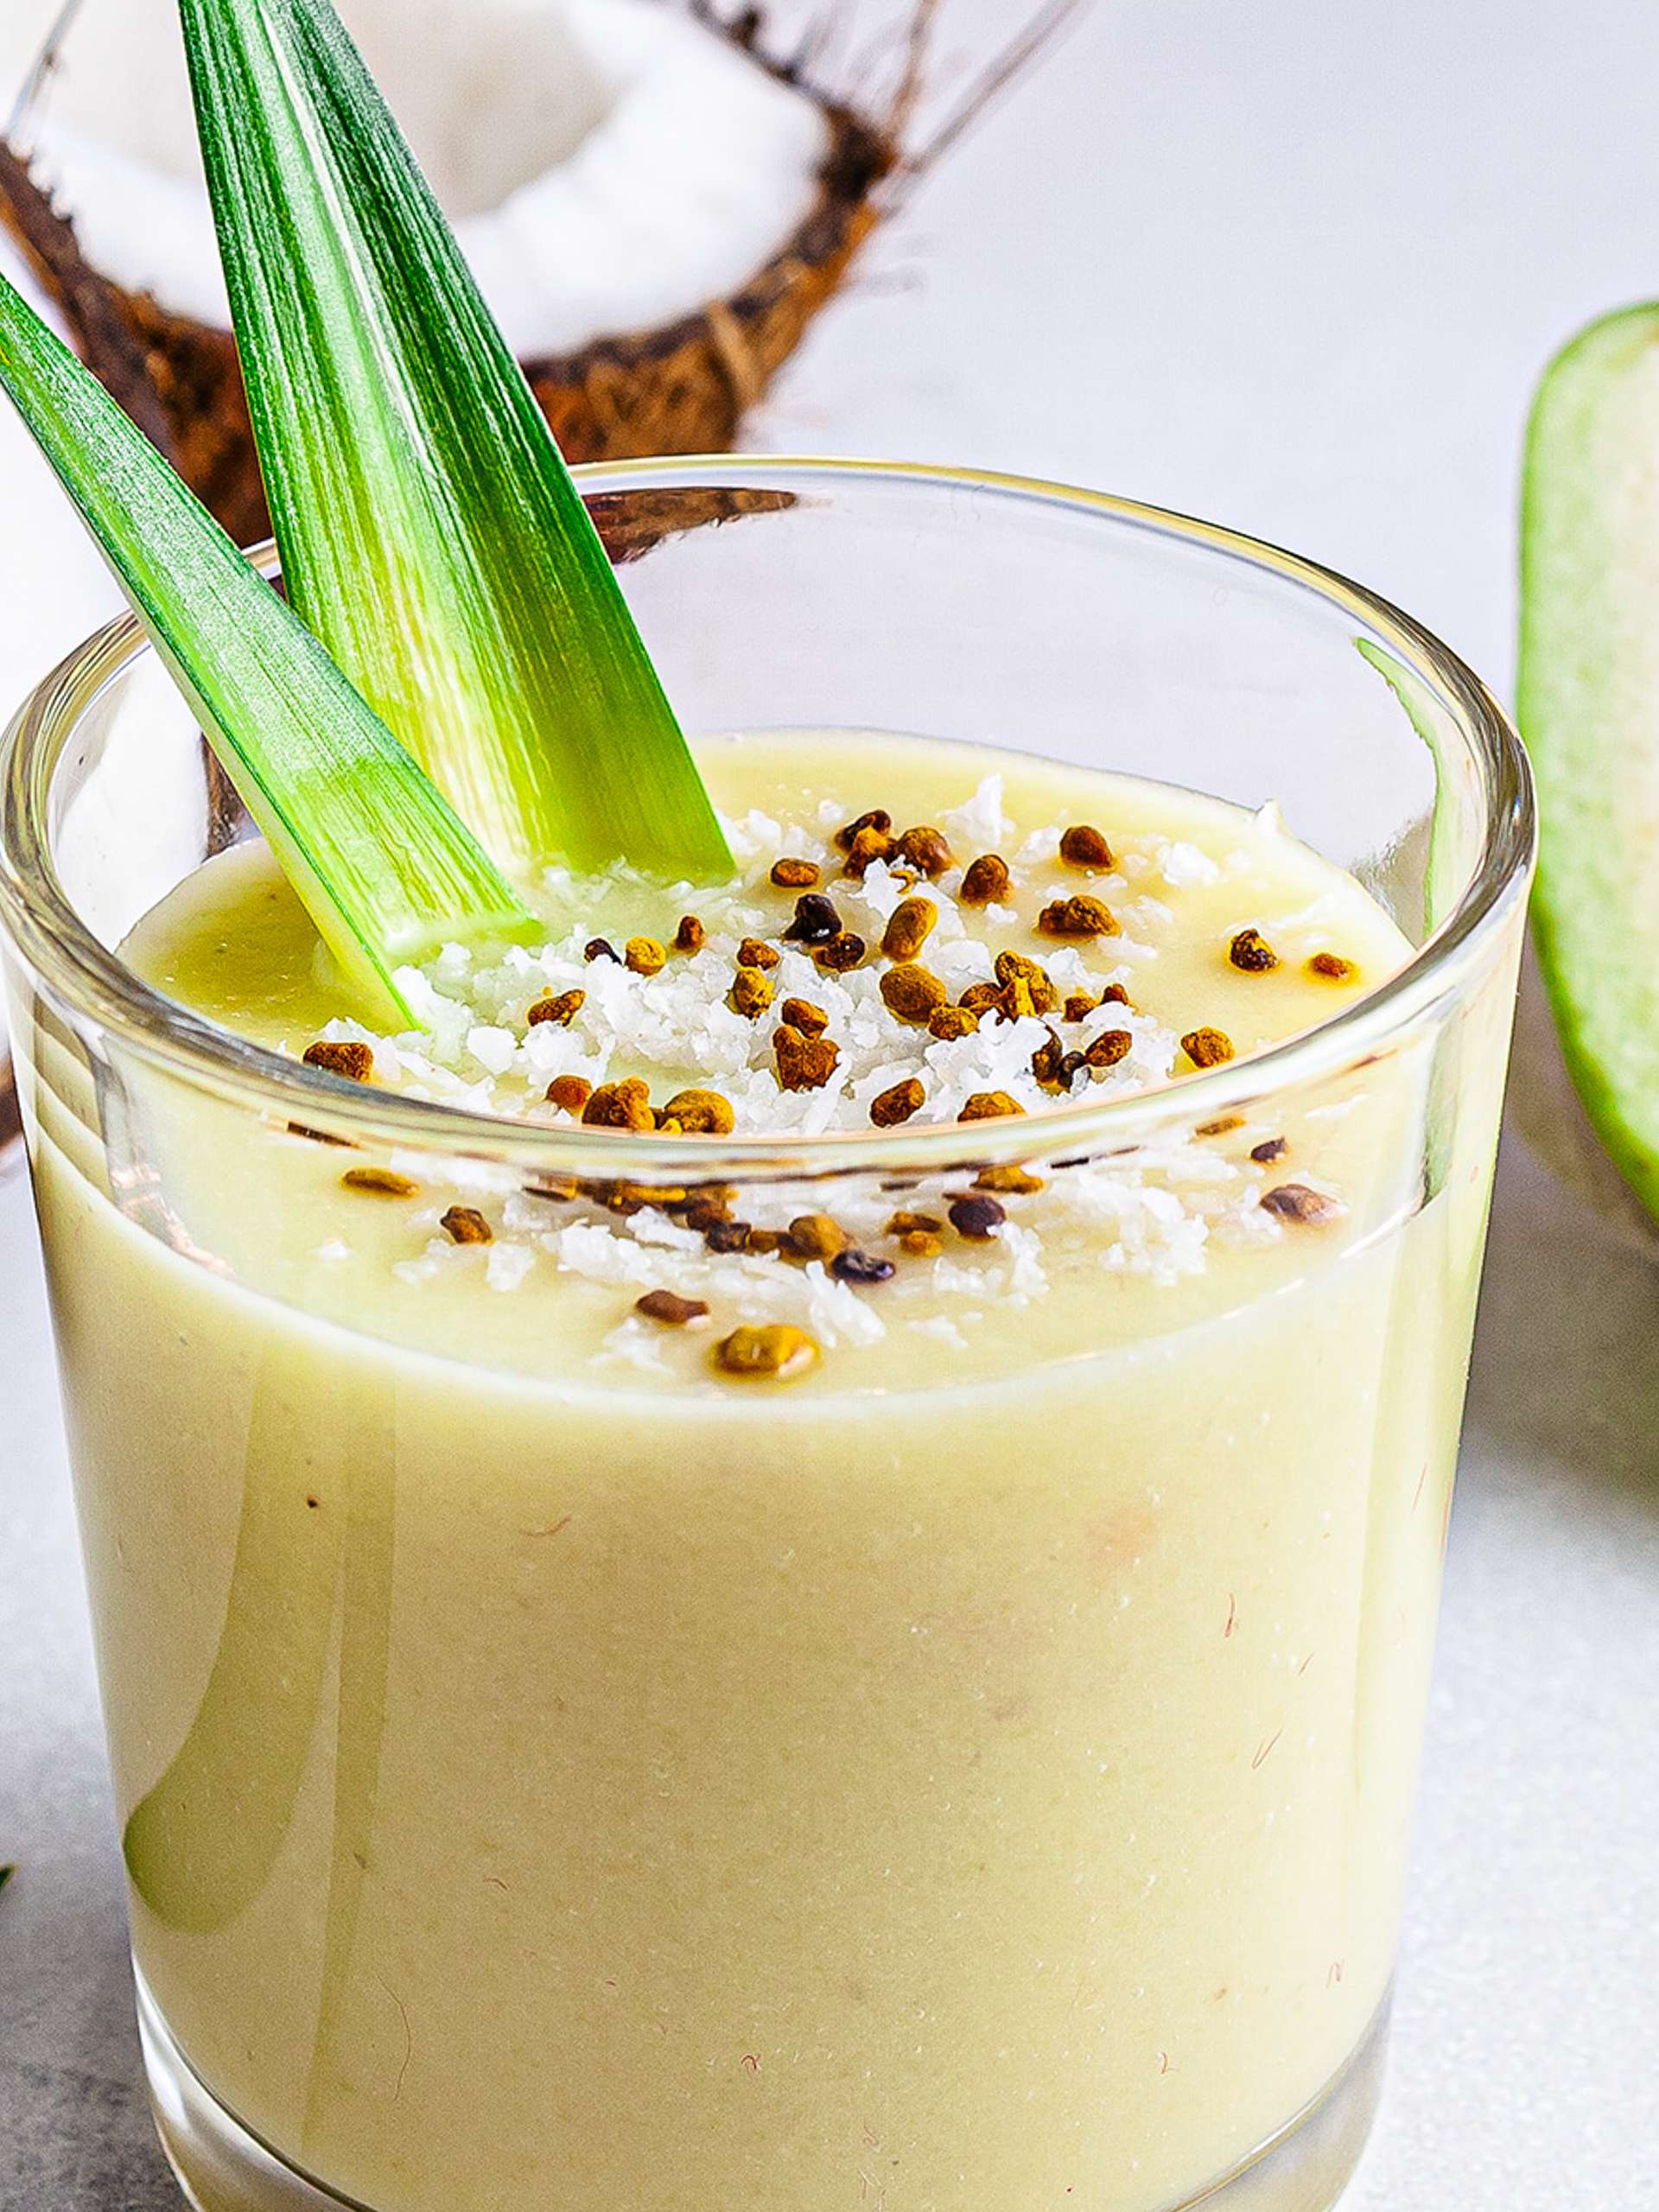 8 Tropical Smoothie Recipes that are Healthy and Easy